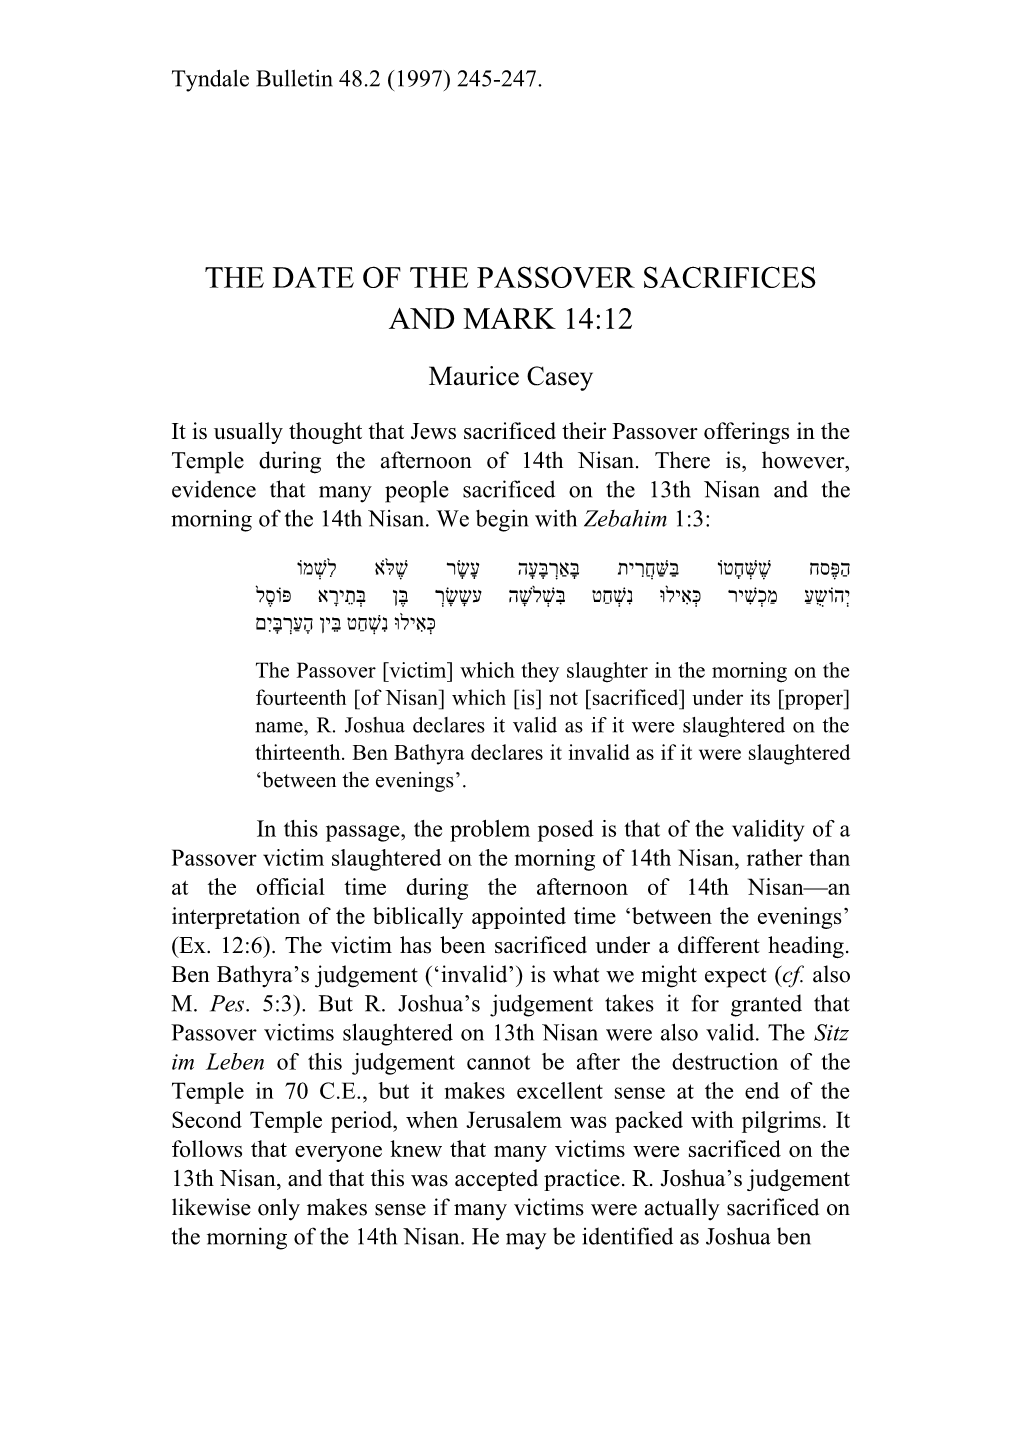 The Date of the Passover Sacrifices